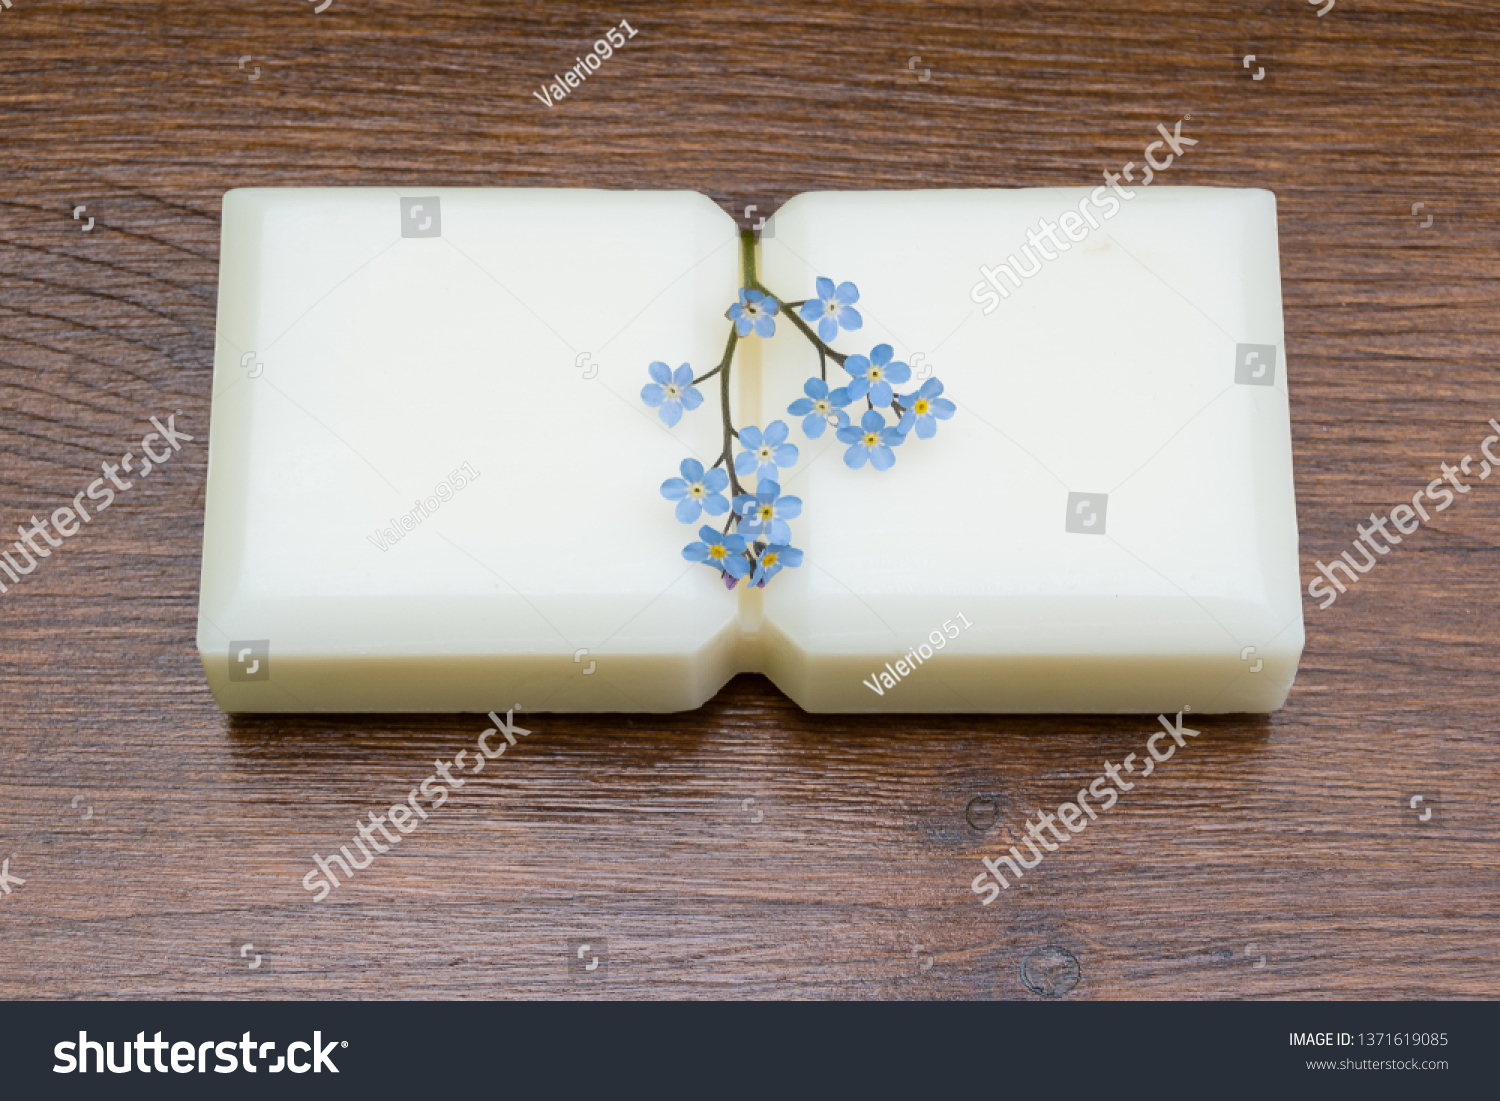 Small marseille soap isolated with flowers on wooden table in the foreground.foreground. #1371619085